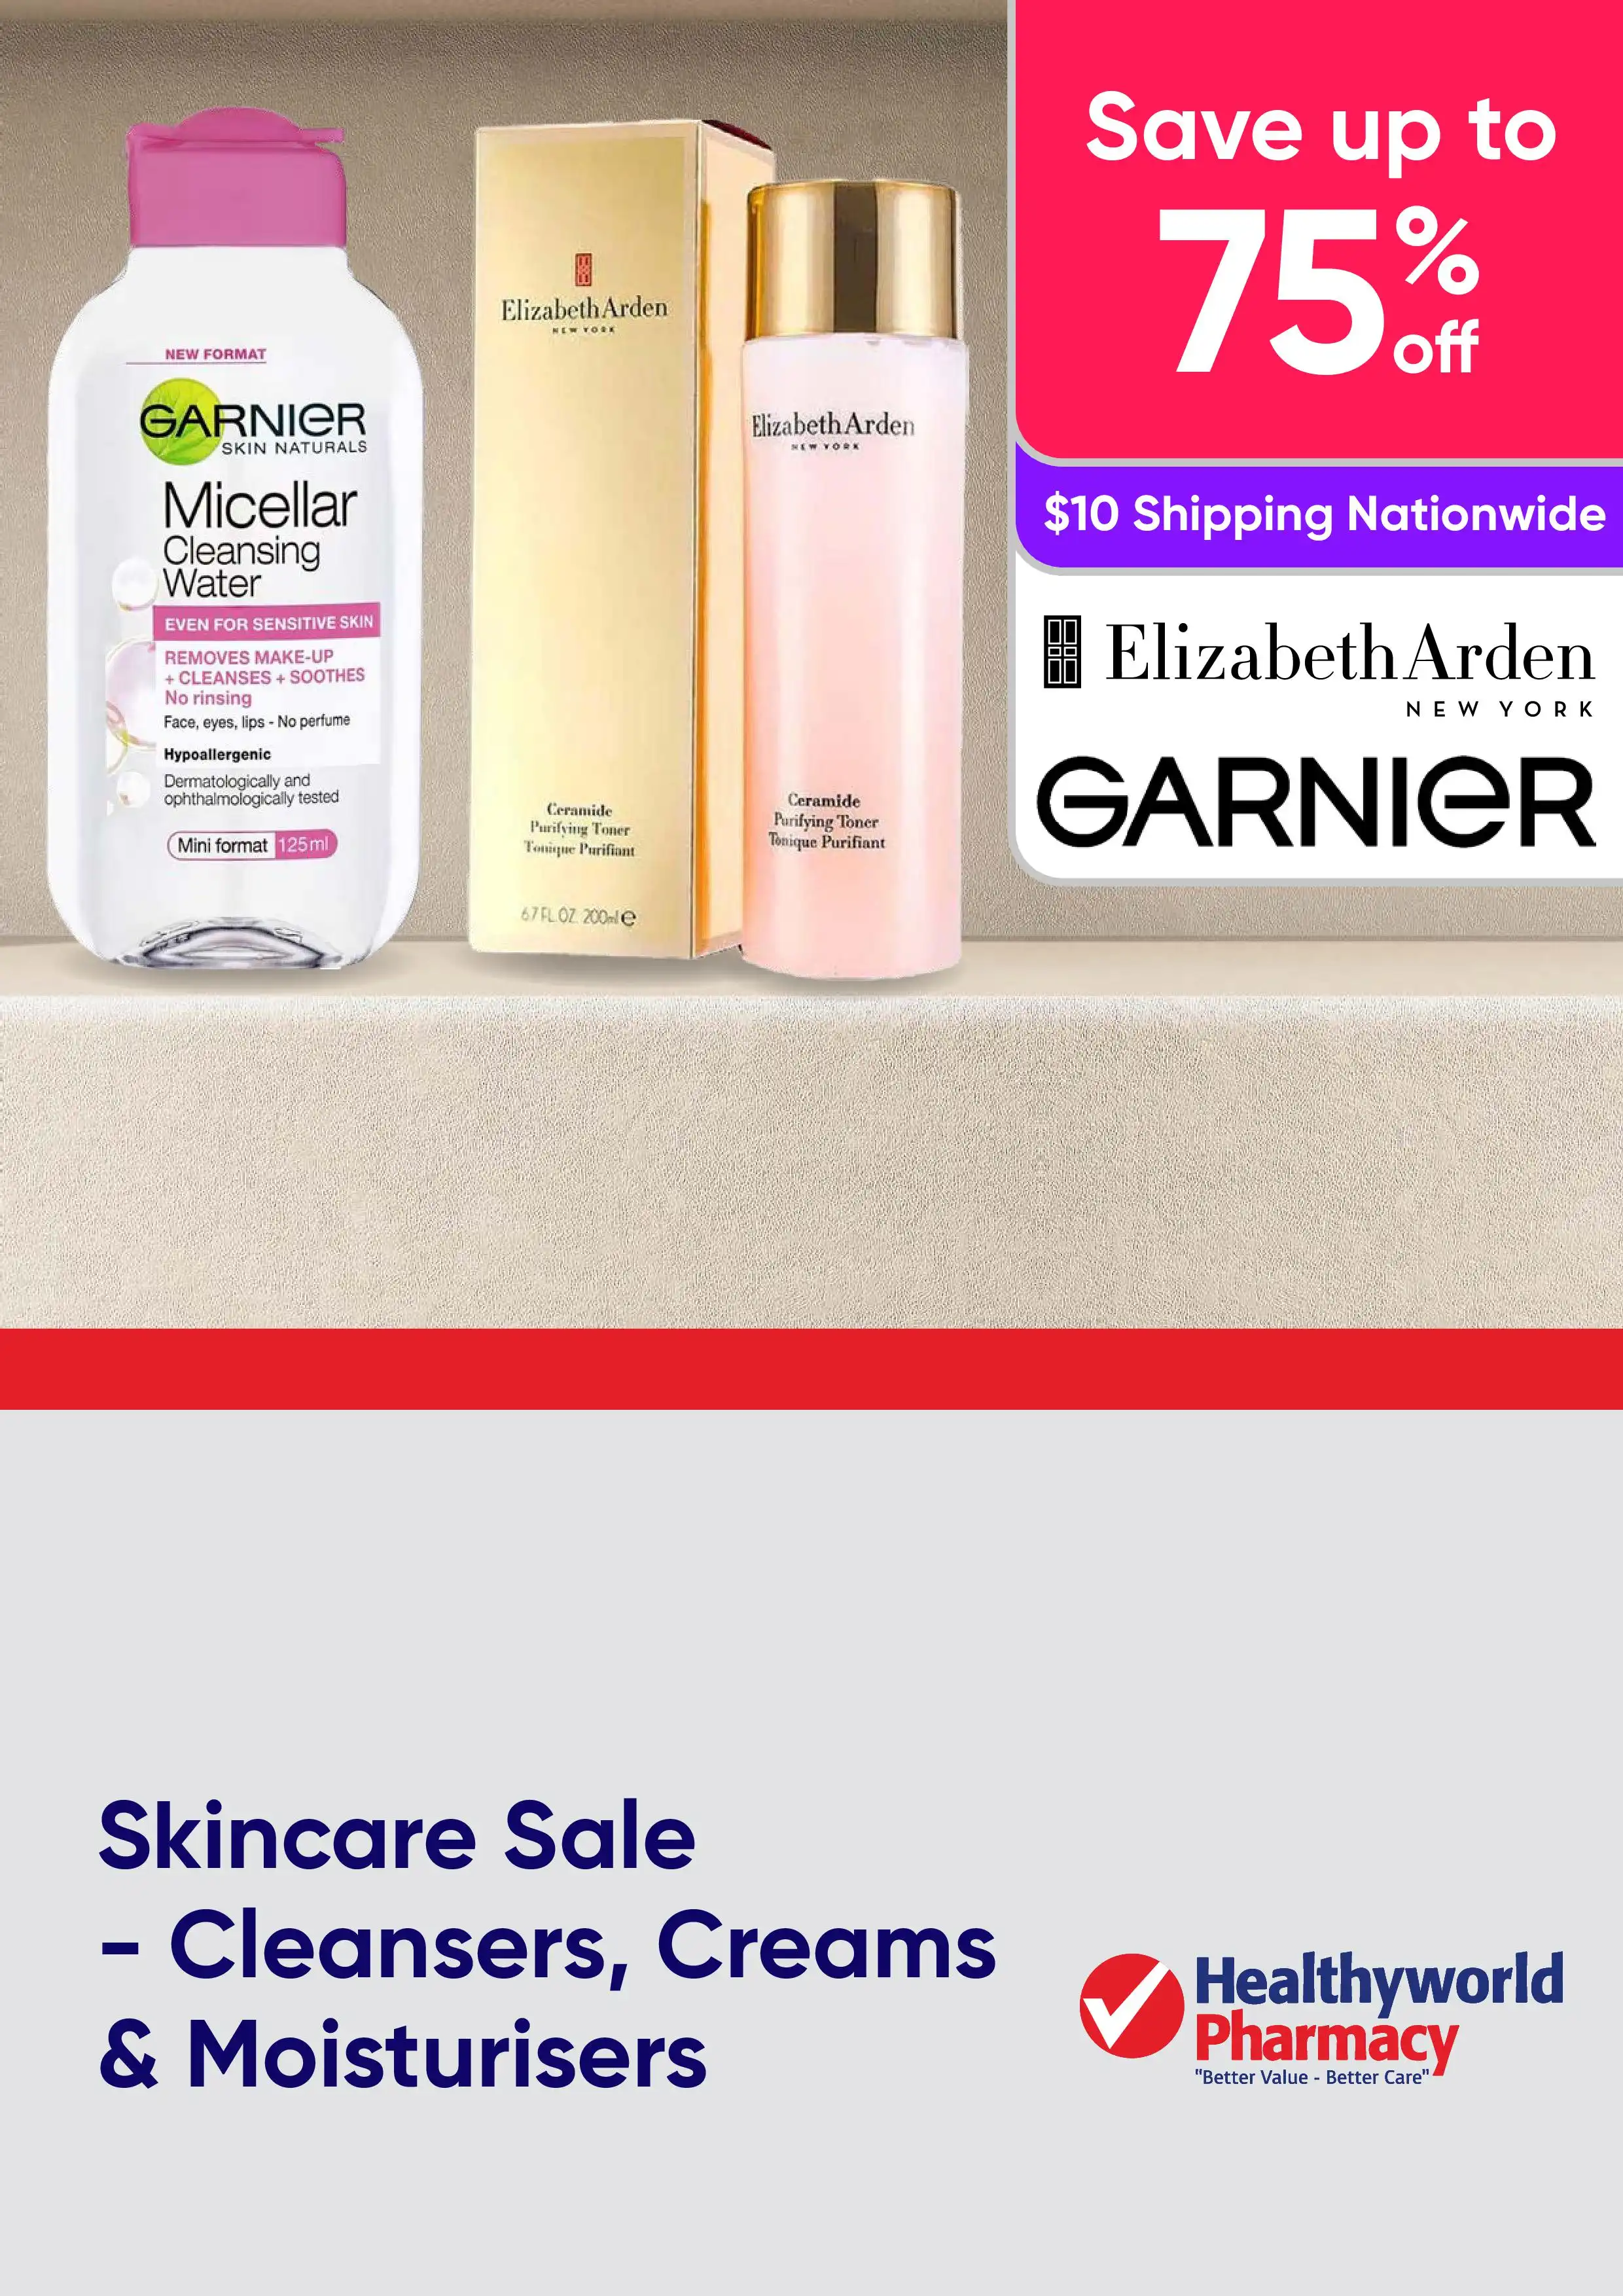 Skincare Sale - Cleansers, Creams & Moisturisers up to 75% Off